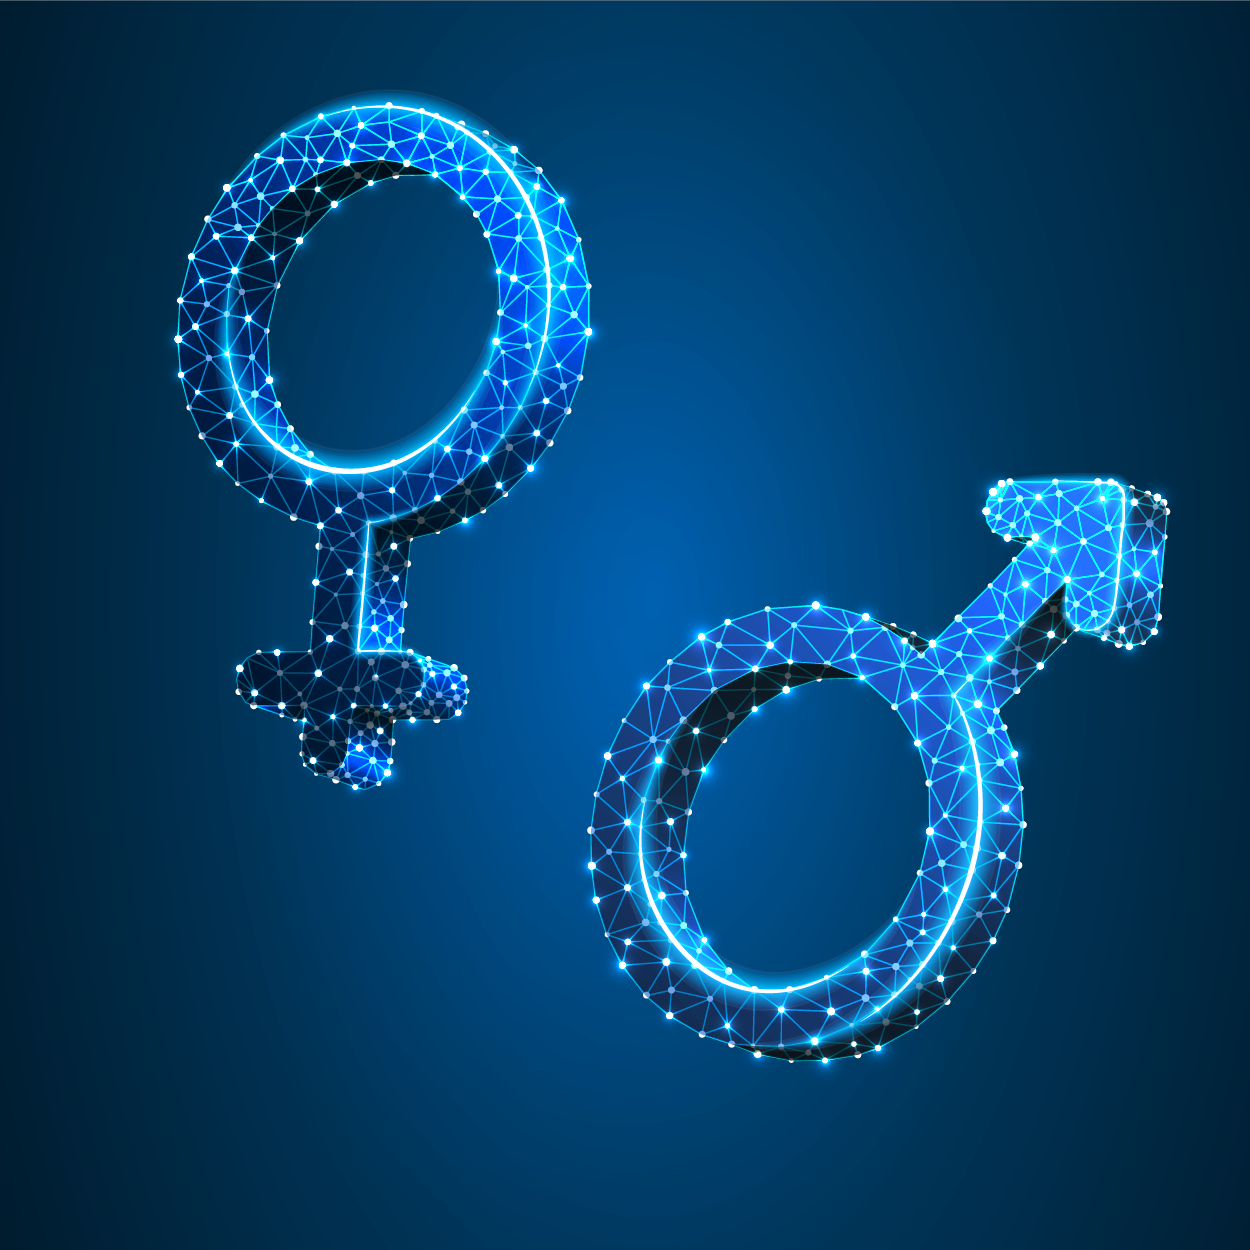 Blue graphic and male and female symbols with data connectivity theme